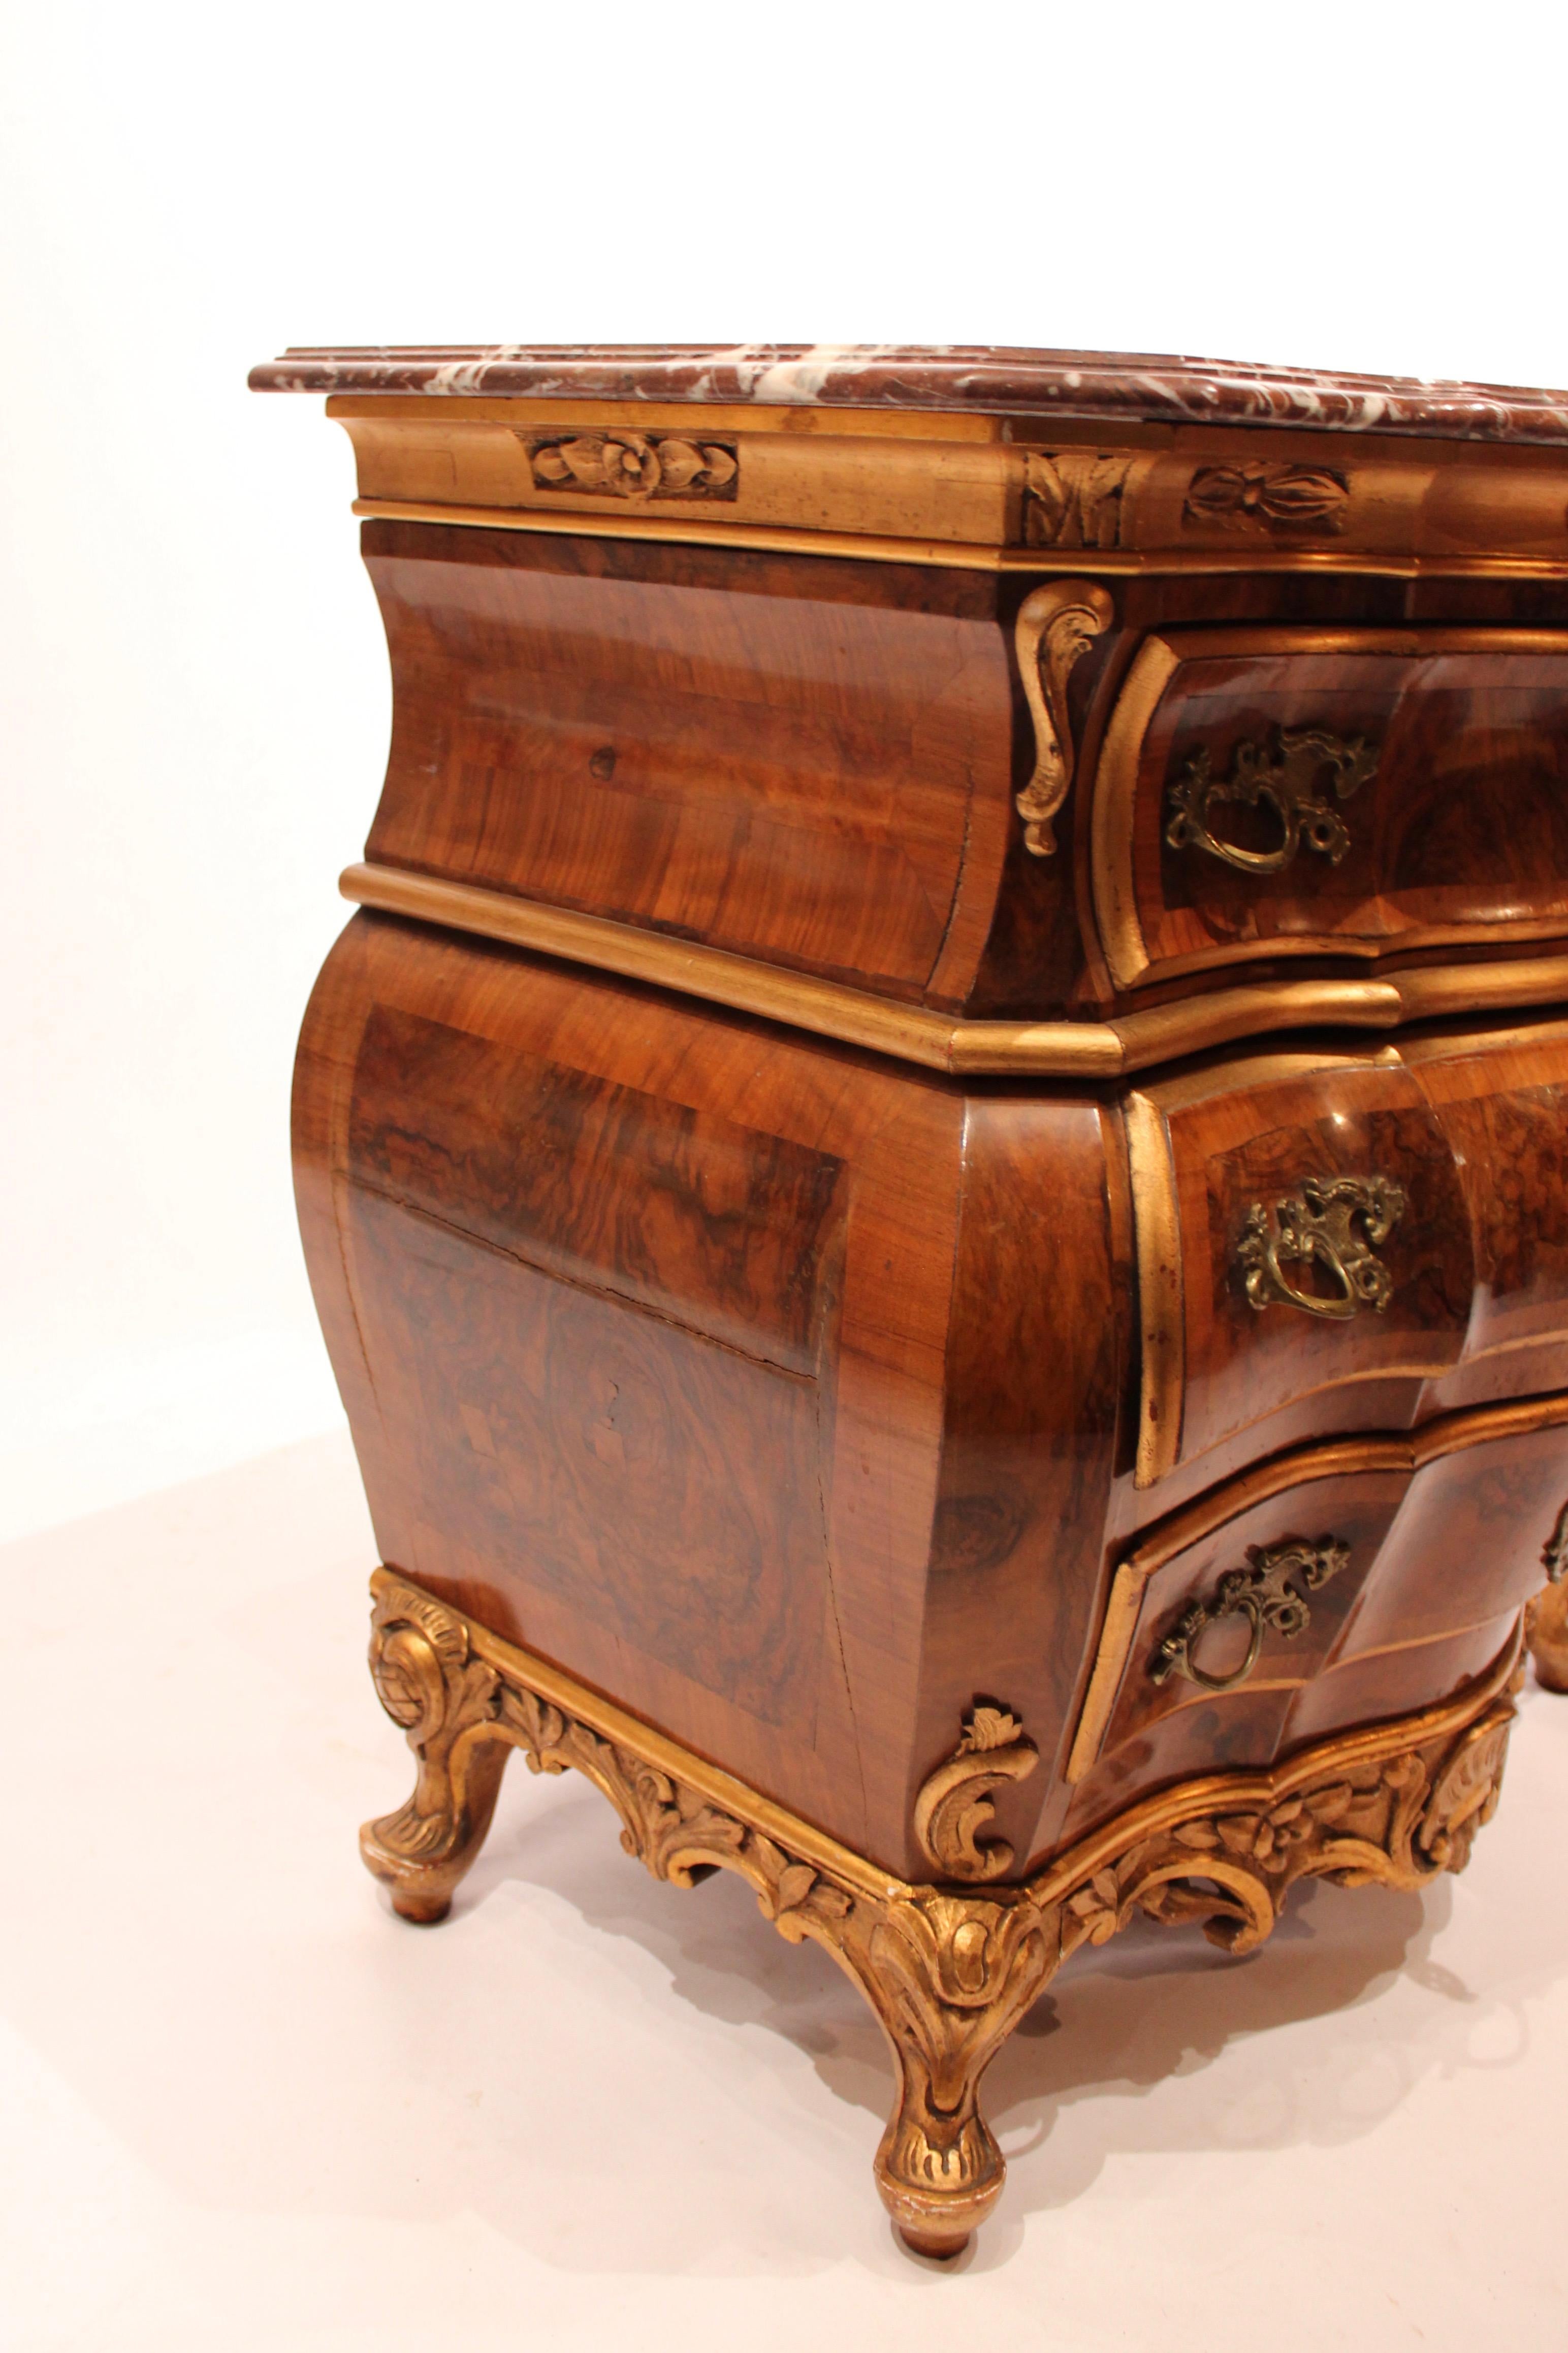 Chest of Drawers of Walnut with Marble Top Plate from Denmark, circa 1880s (Sonstiges)